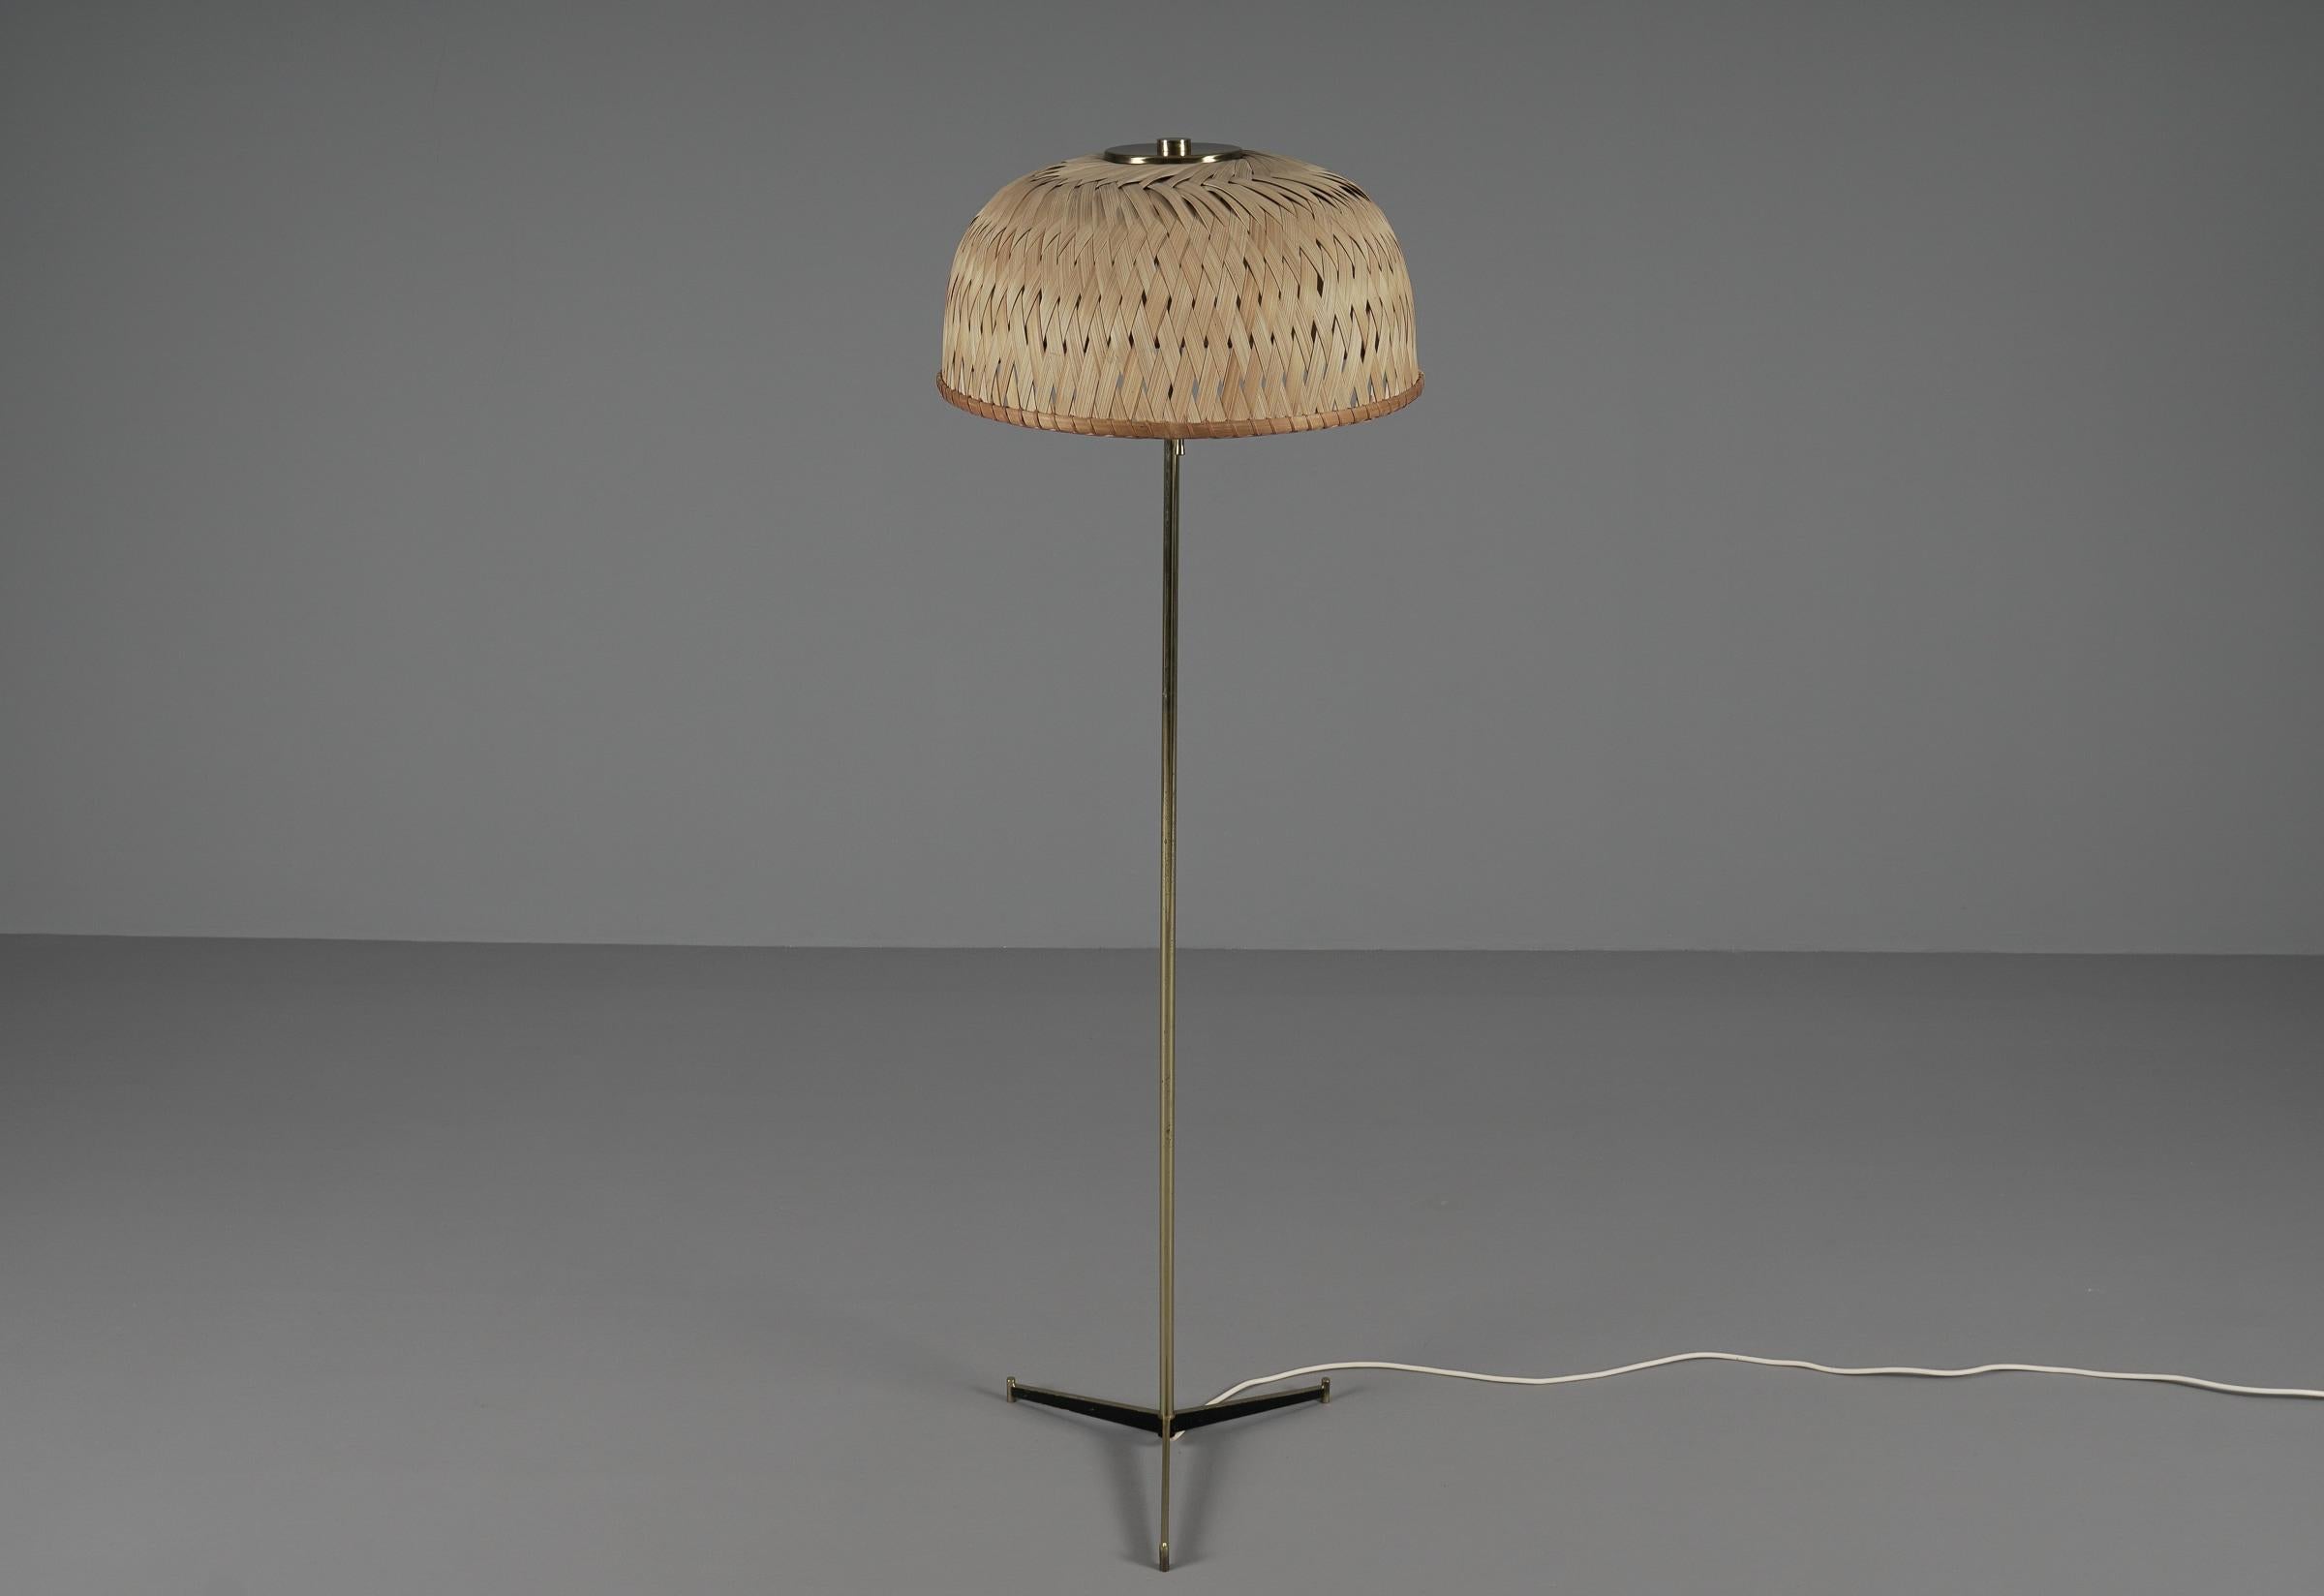 Metal Tripod Floor Lamp in Brass and Wicker Shade, 1950s Italy For Sale